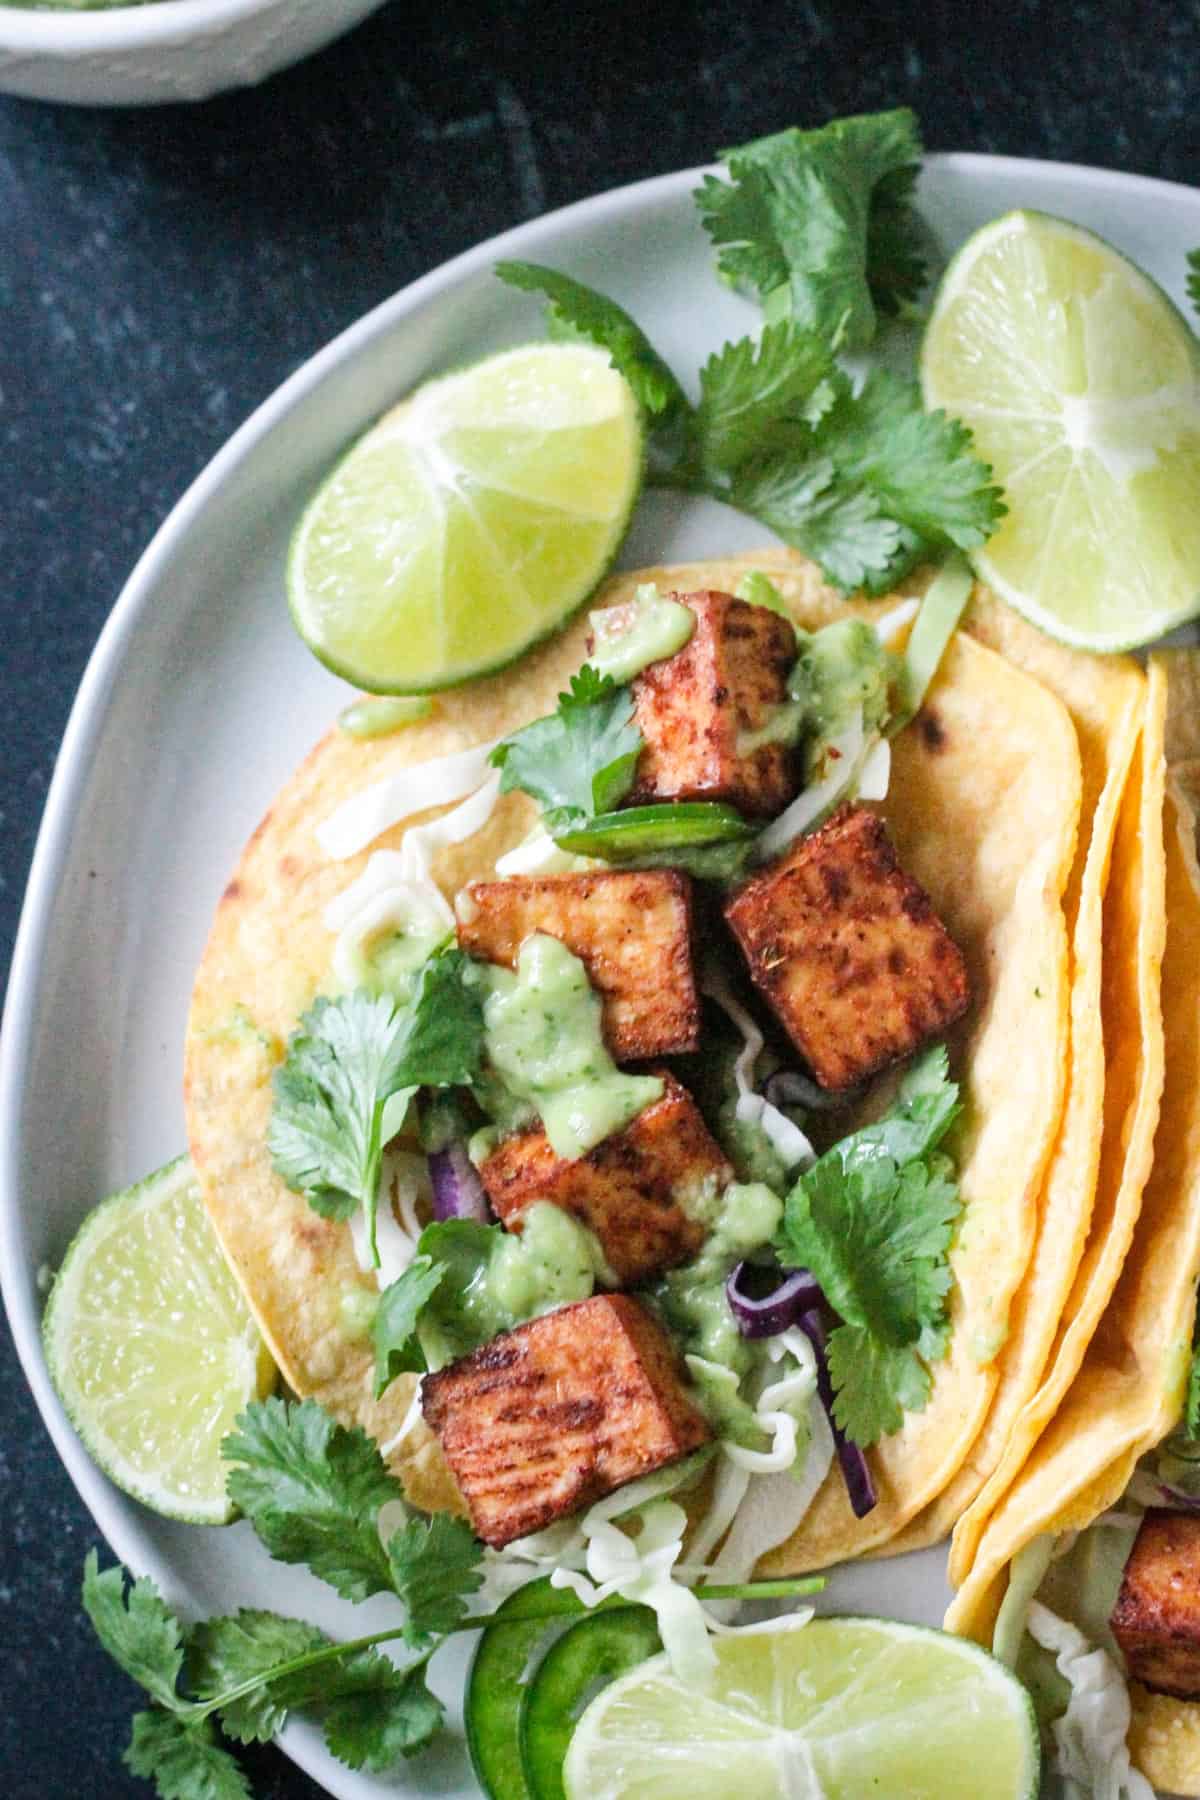 Five cubes of marinated baked tofu in a corn tortilla and topped with avocado lime sauce.